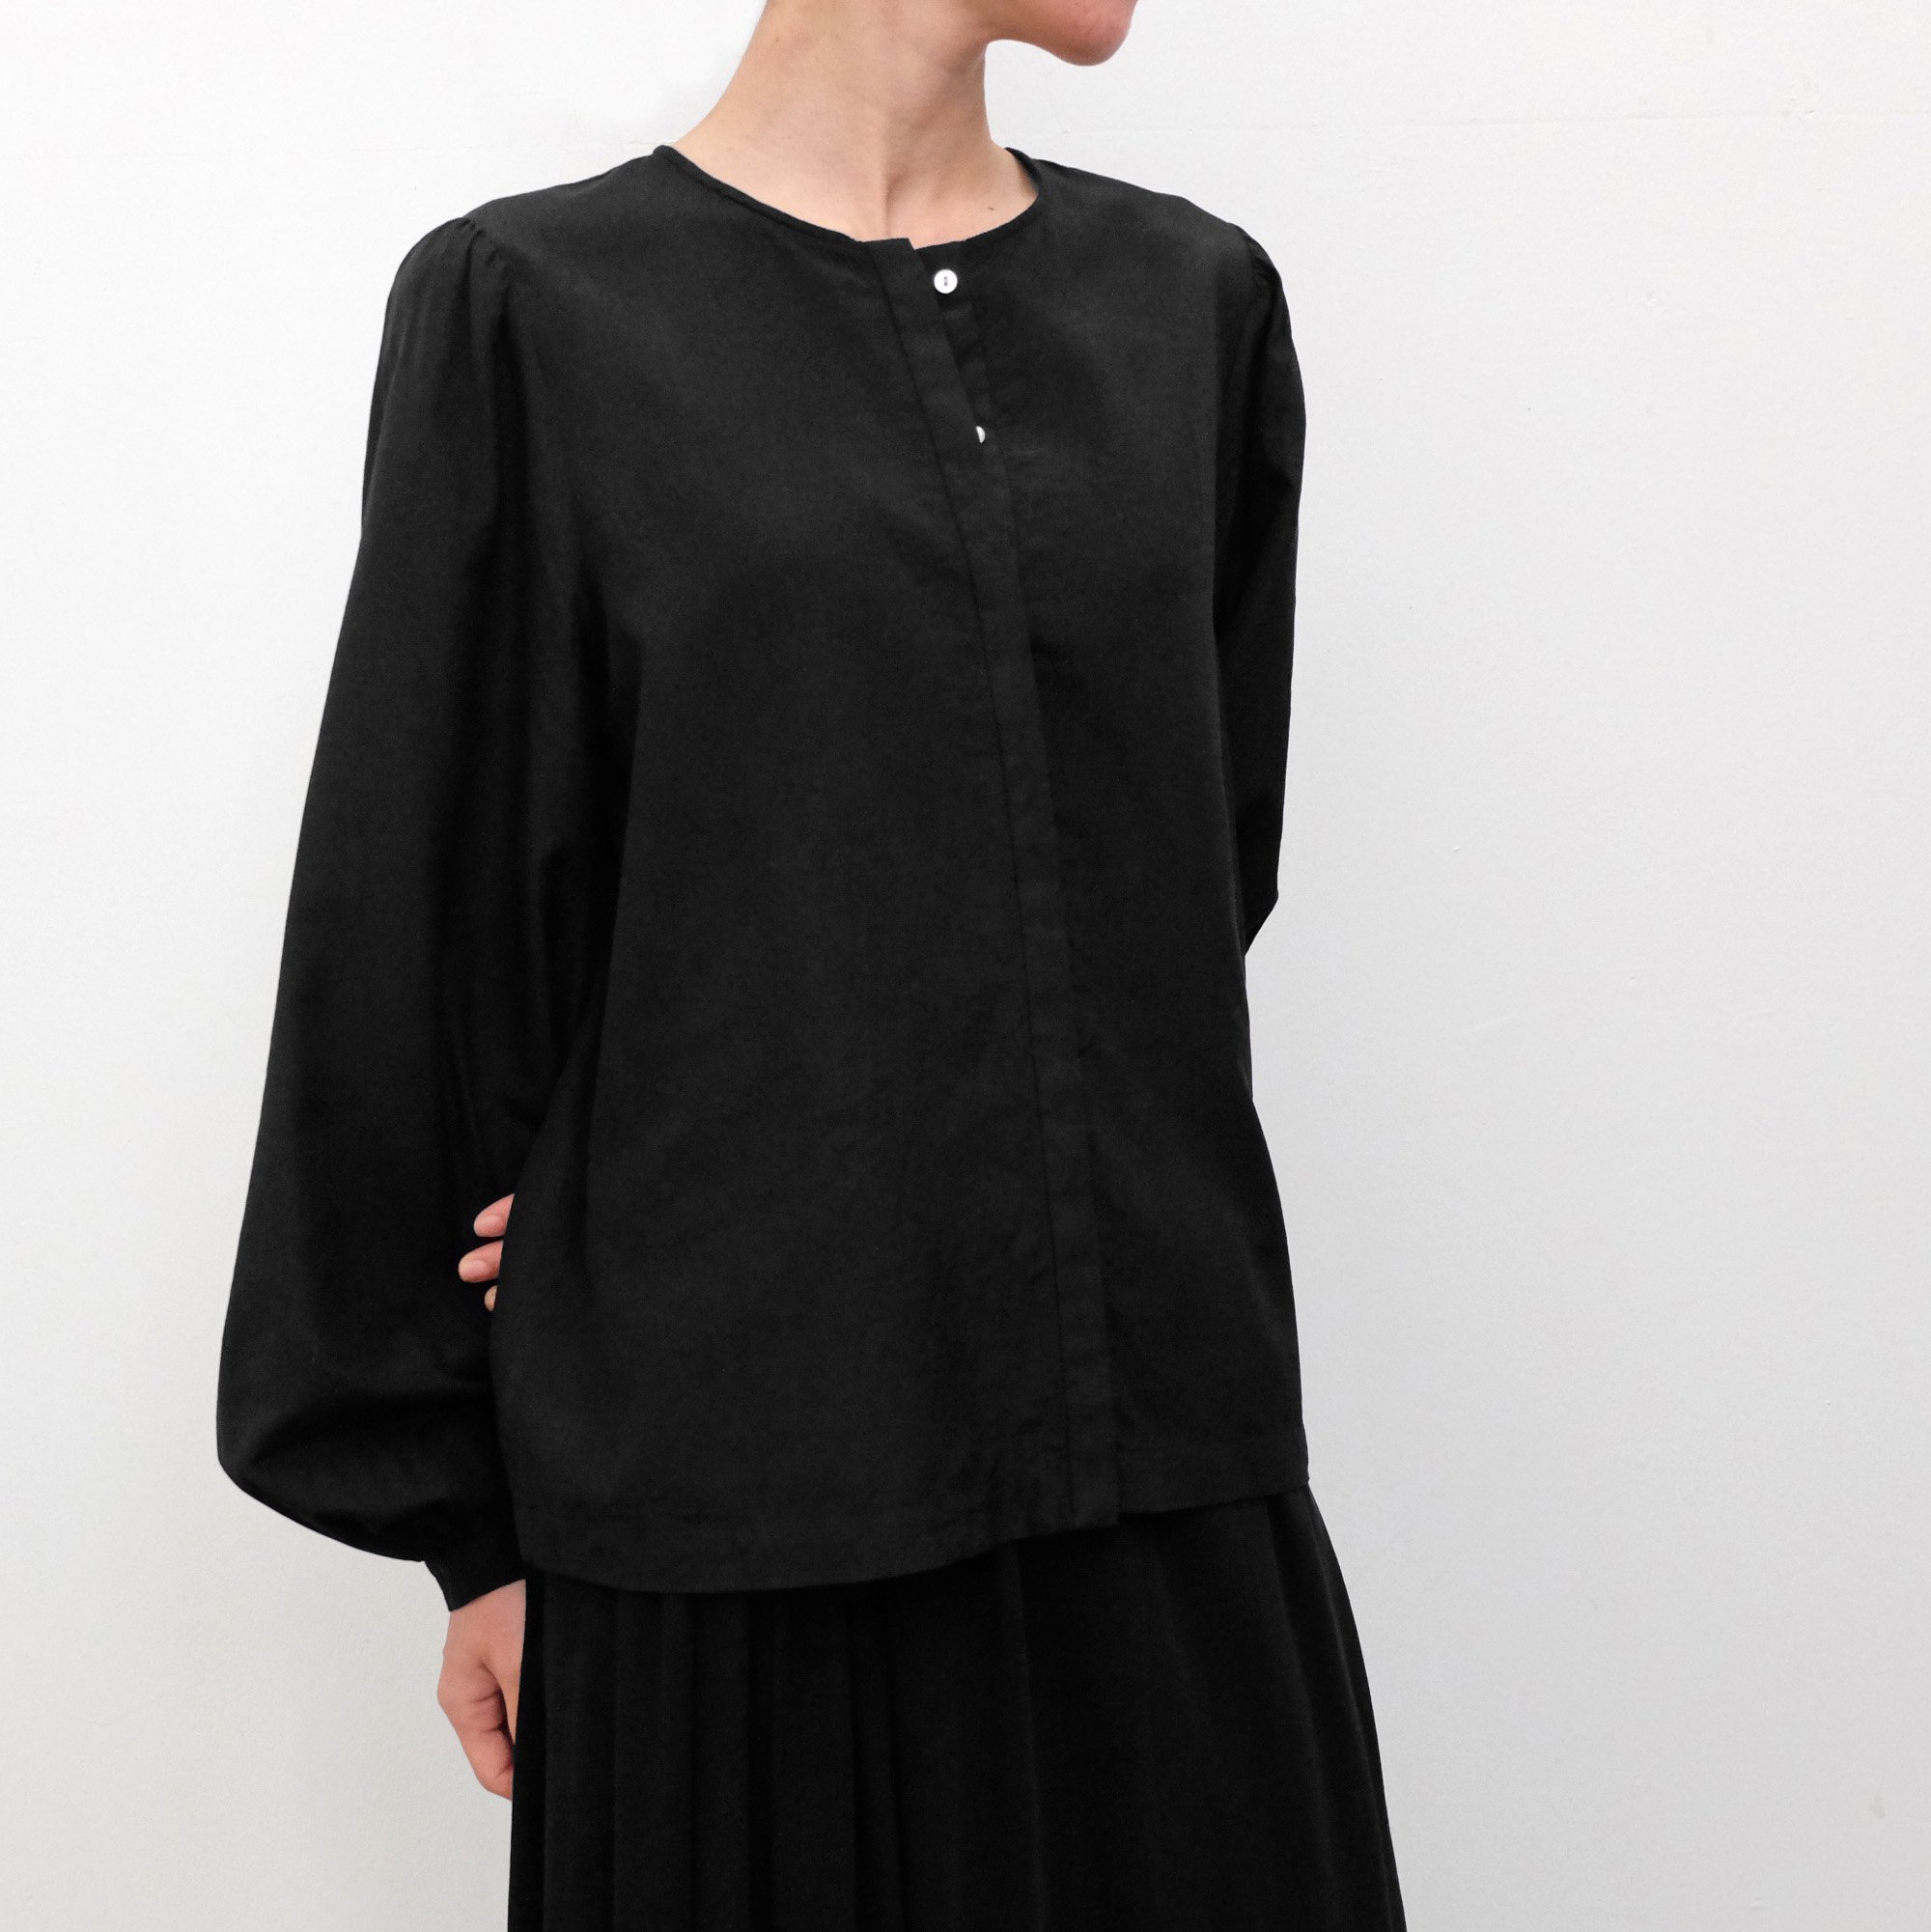 humoresque / puff puff blouse【KS2202a】 - くるみの木